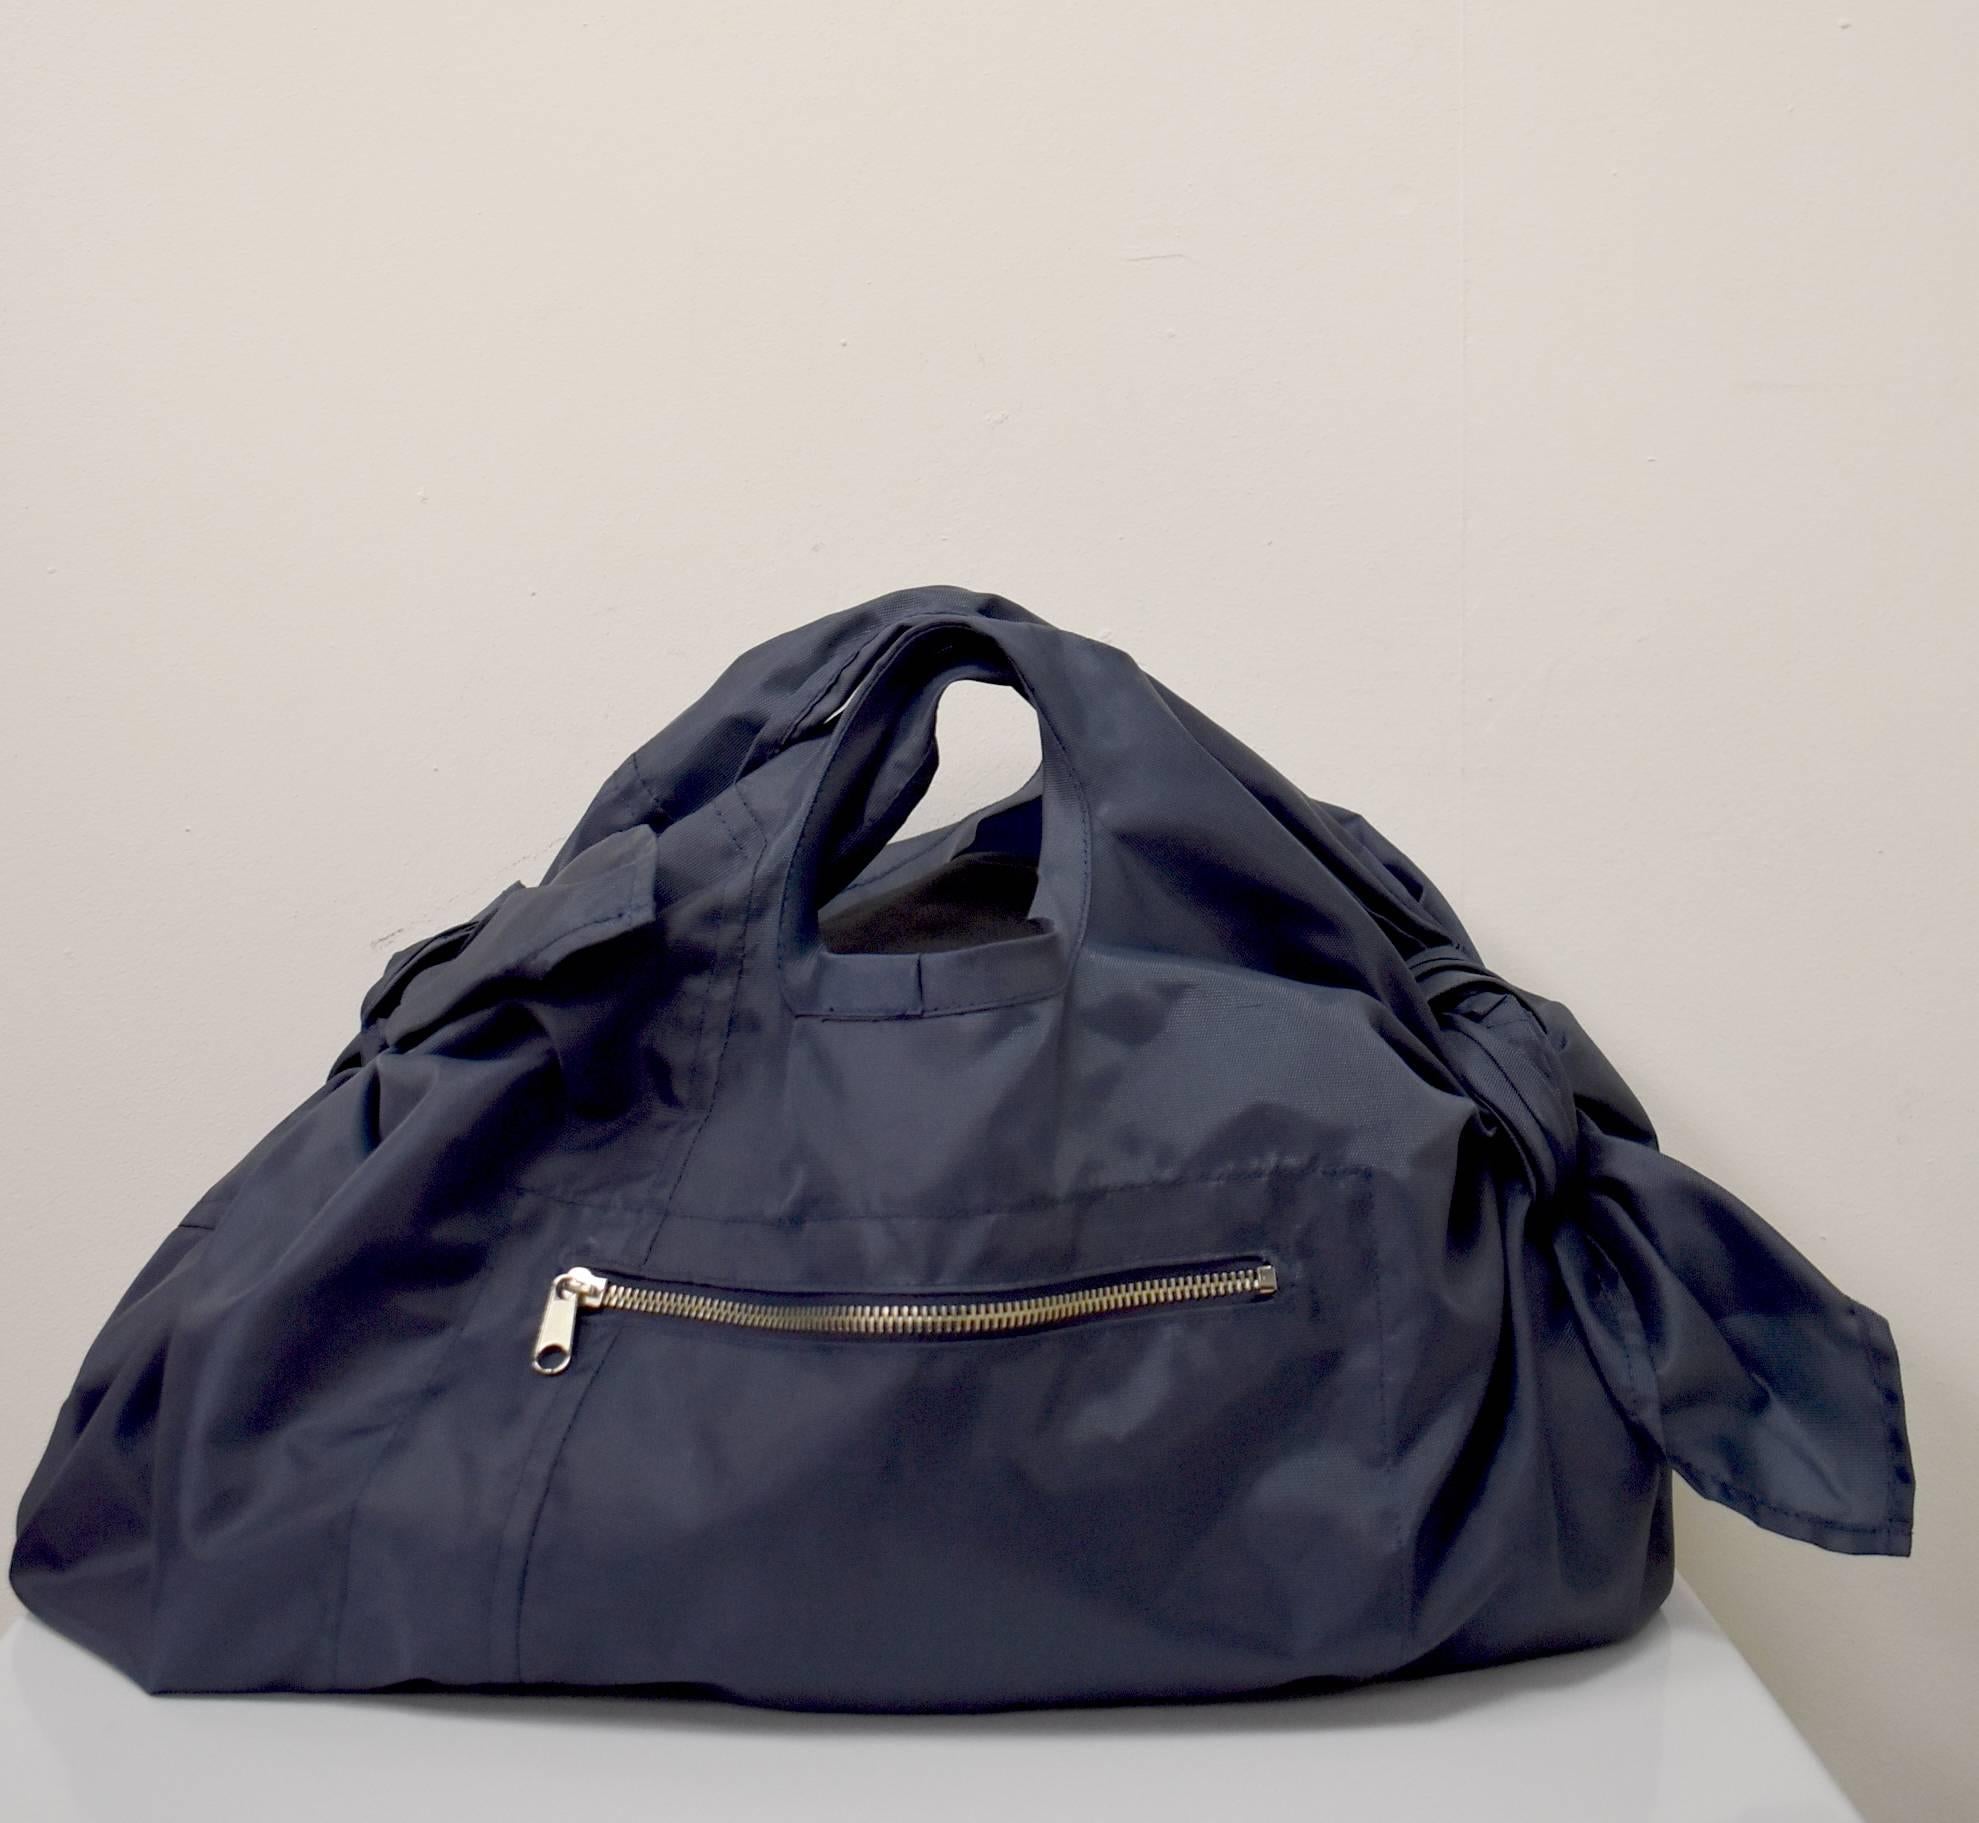 This Comme des Garcons Navy handbag has a soft rectangular shape with two short shoulder straps which can be knotted and tied to create a longer or shorter length. The bag is made from a sporty synthetic material and has a zip pocket on the front.